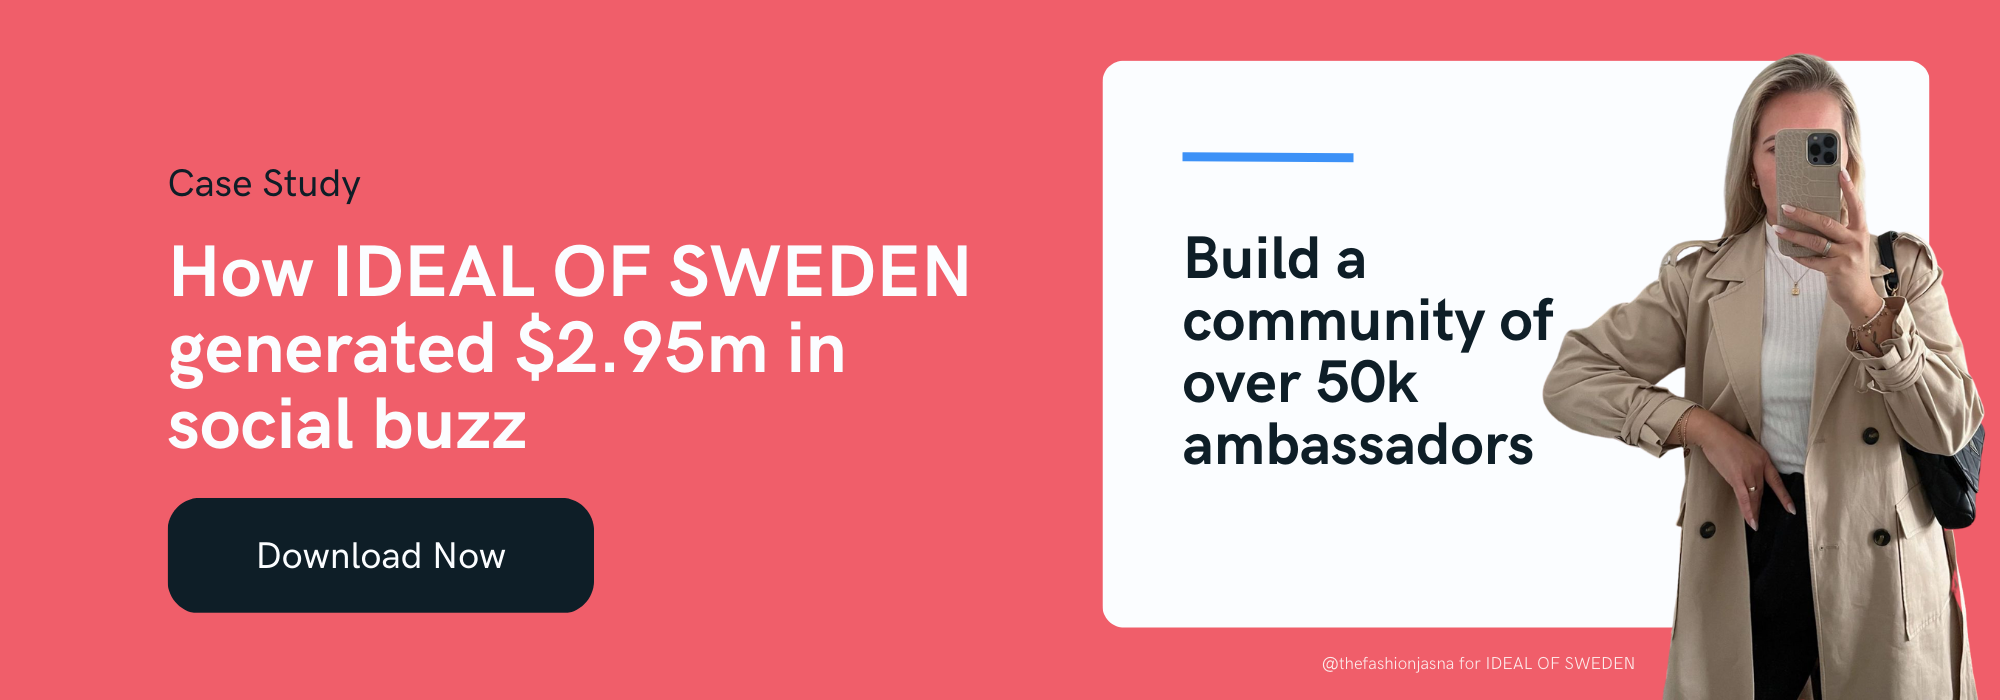 Case Study: How IDEAL OF SWEDEN generated $2.95m in social buzz. Download Now.